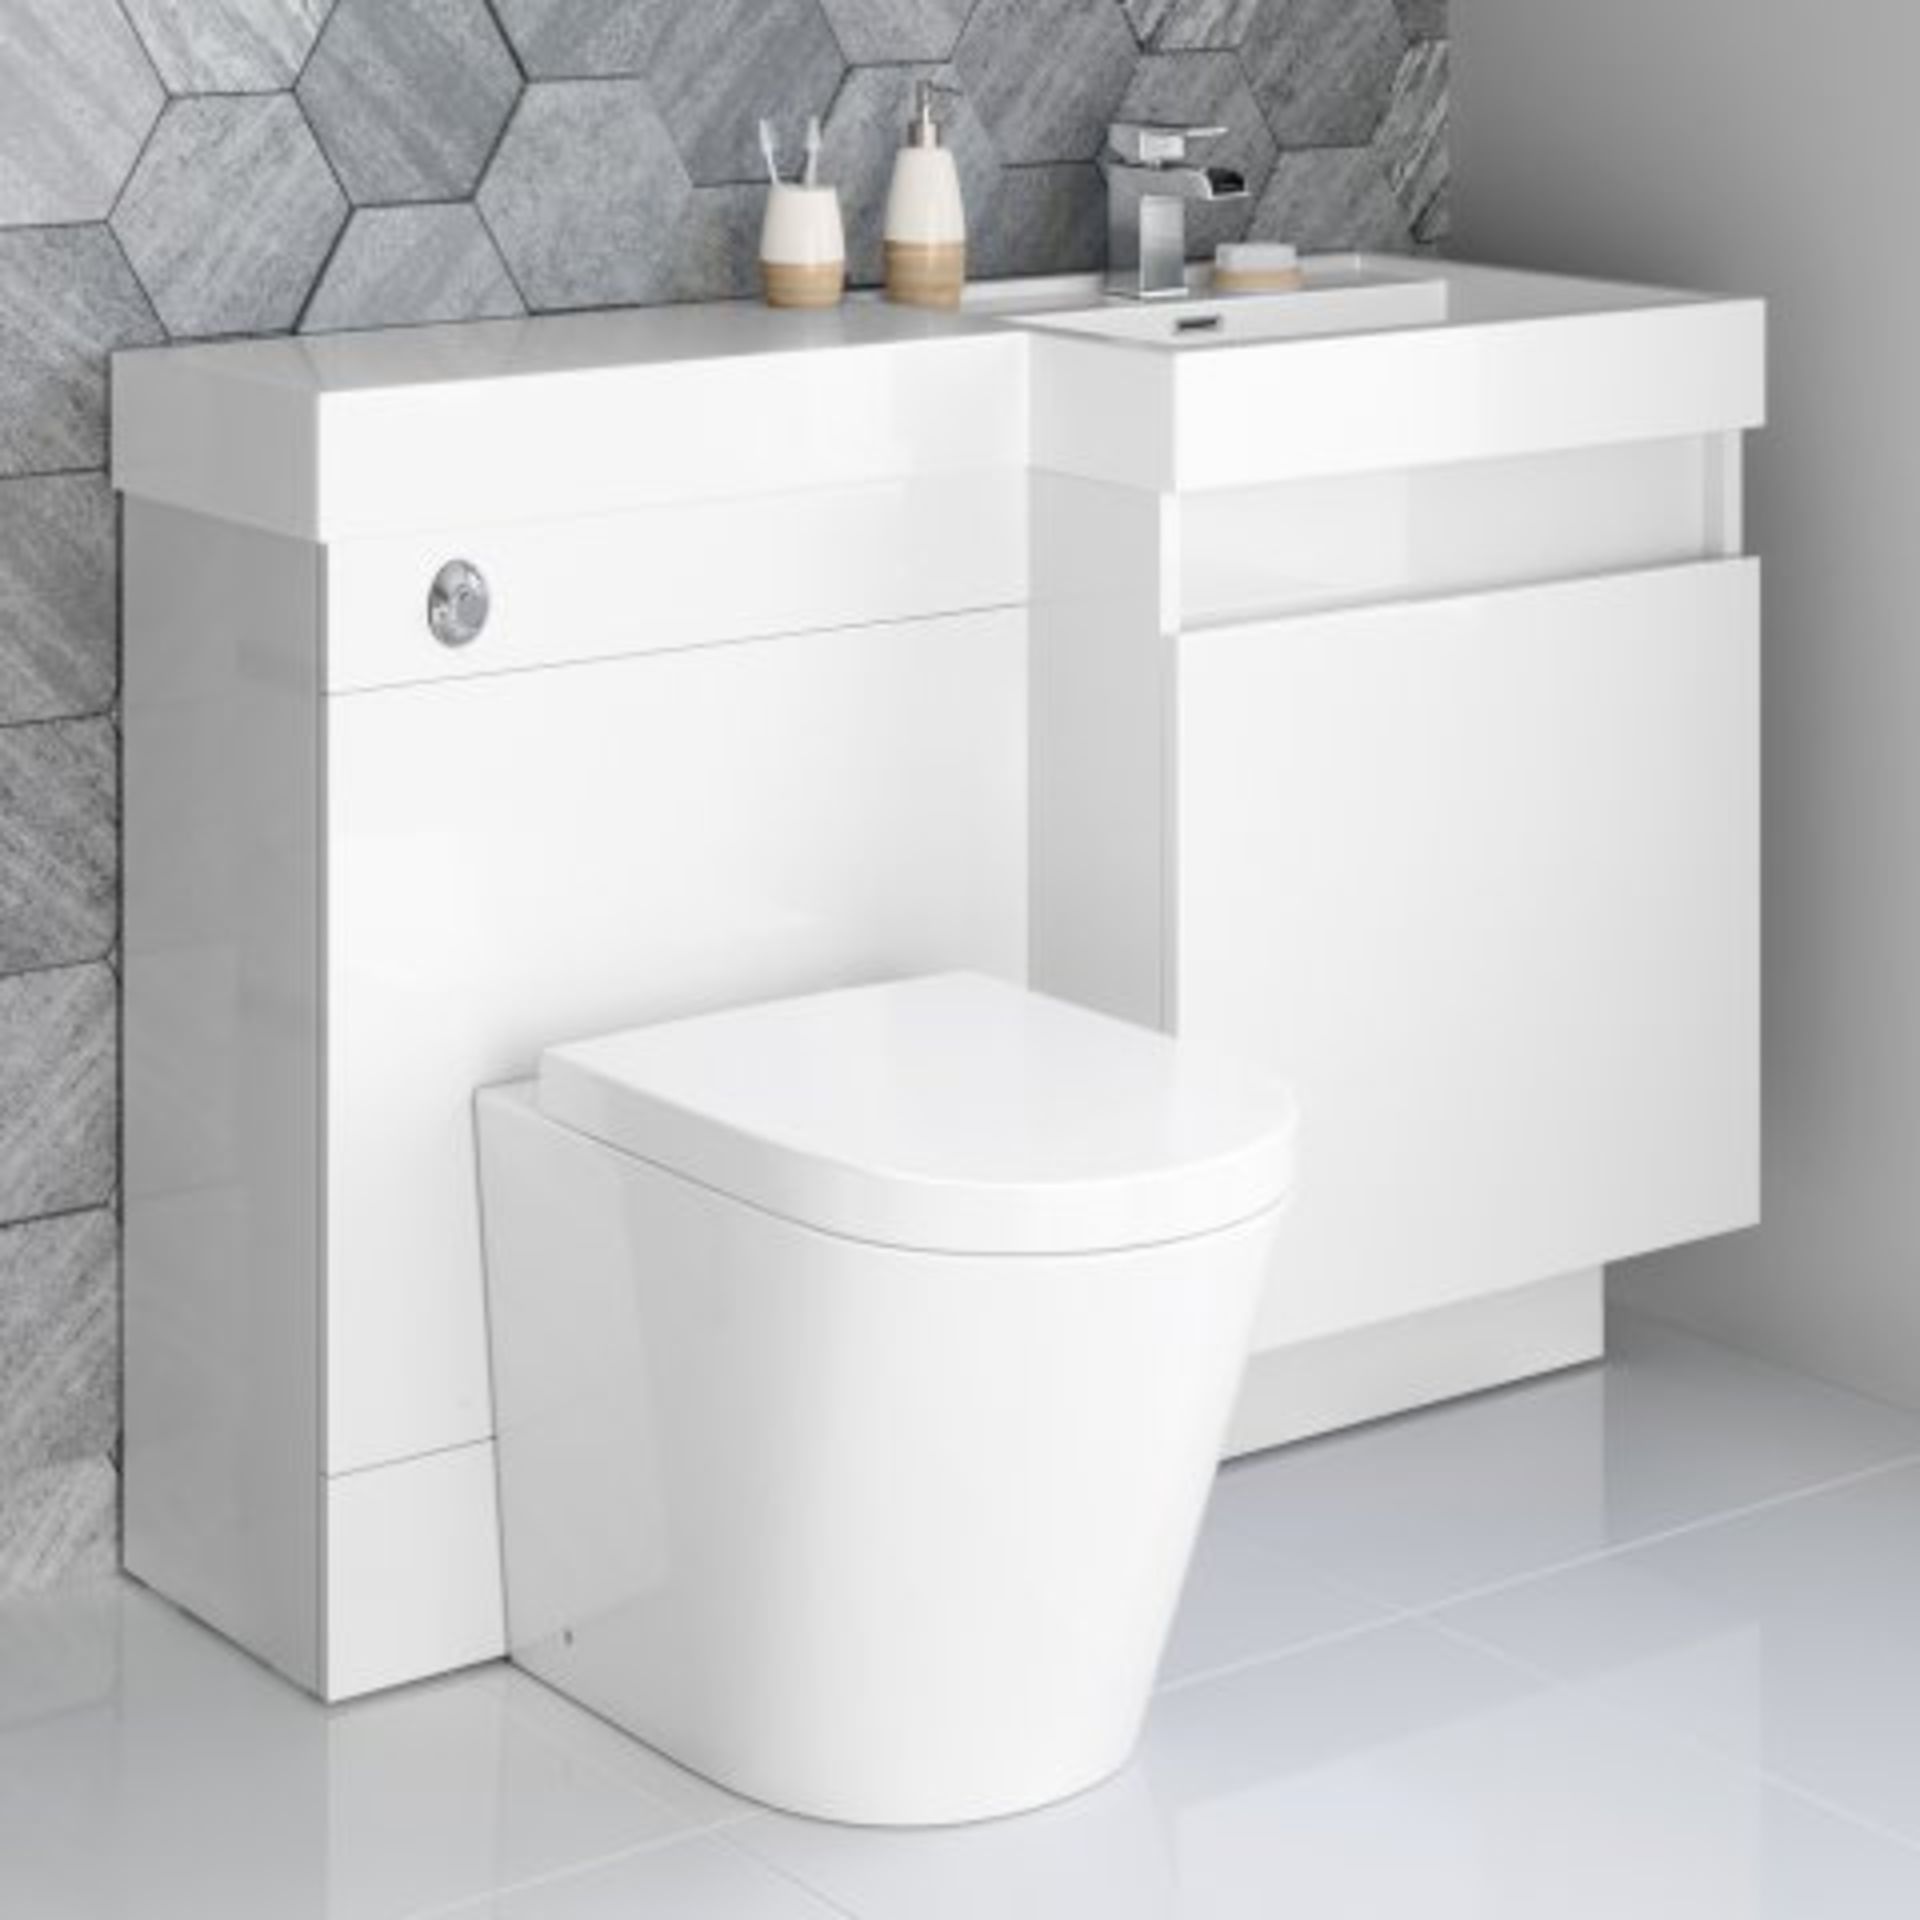 (I1) 1206mm Olympia Gloss White Drawer Vanity Unit Set. - Lyon Pan. RRP £1,074. Our combined